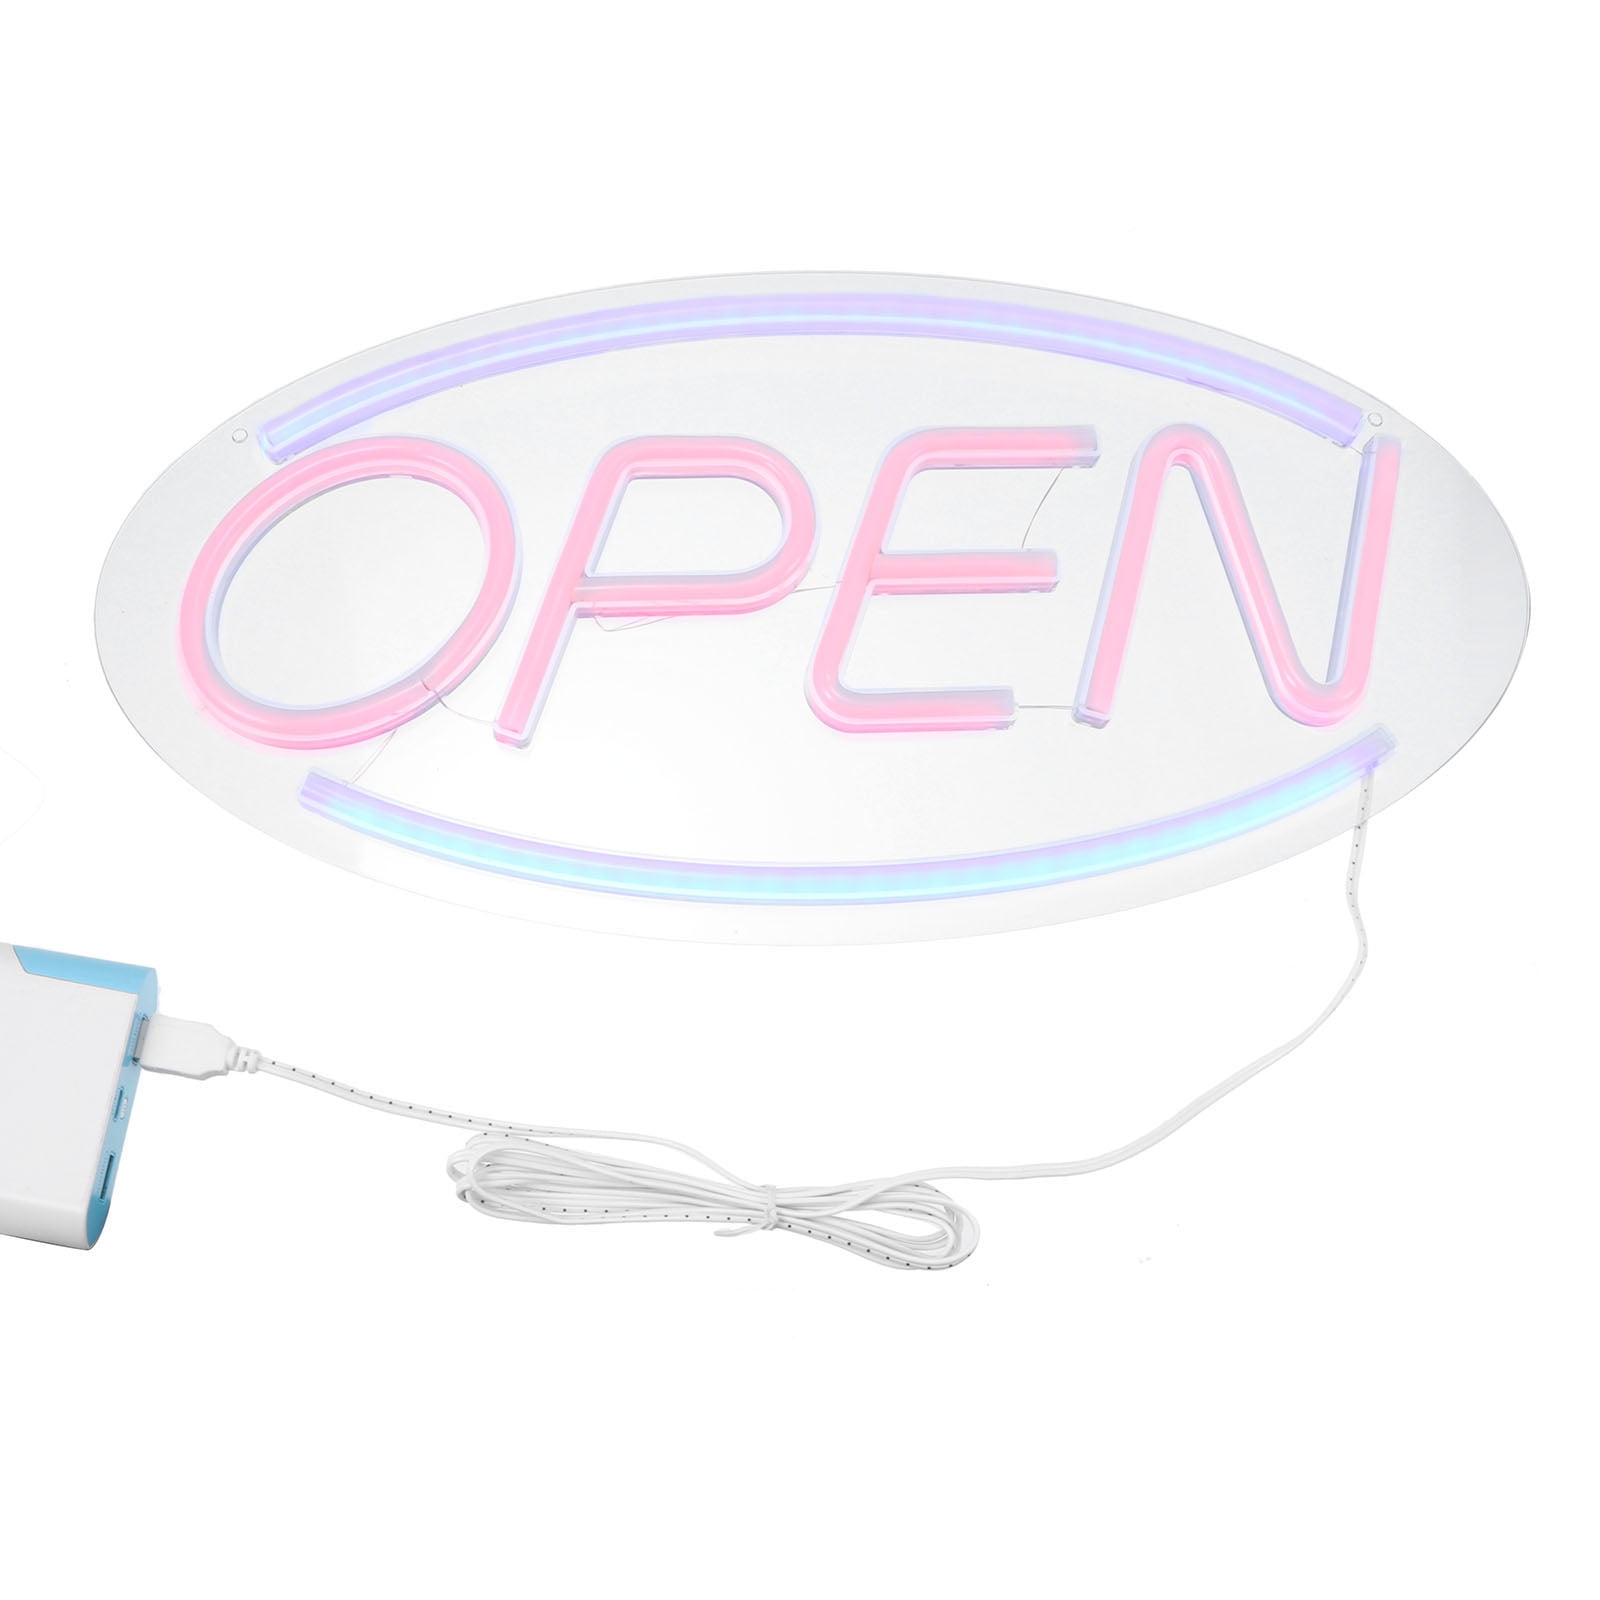 Details about   Neon Light Sign Billboard Hangable High Quality Advertising Bar Bookstore Shop 